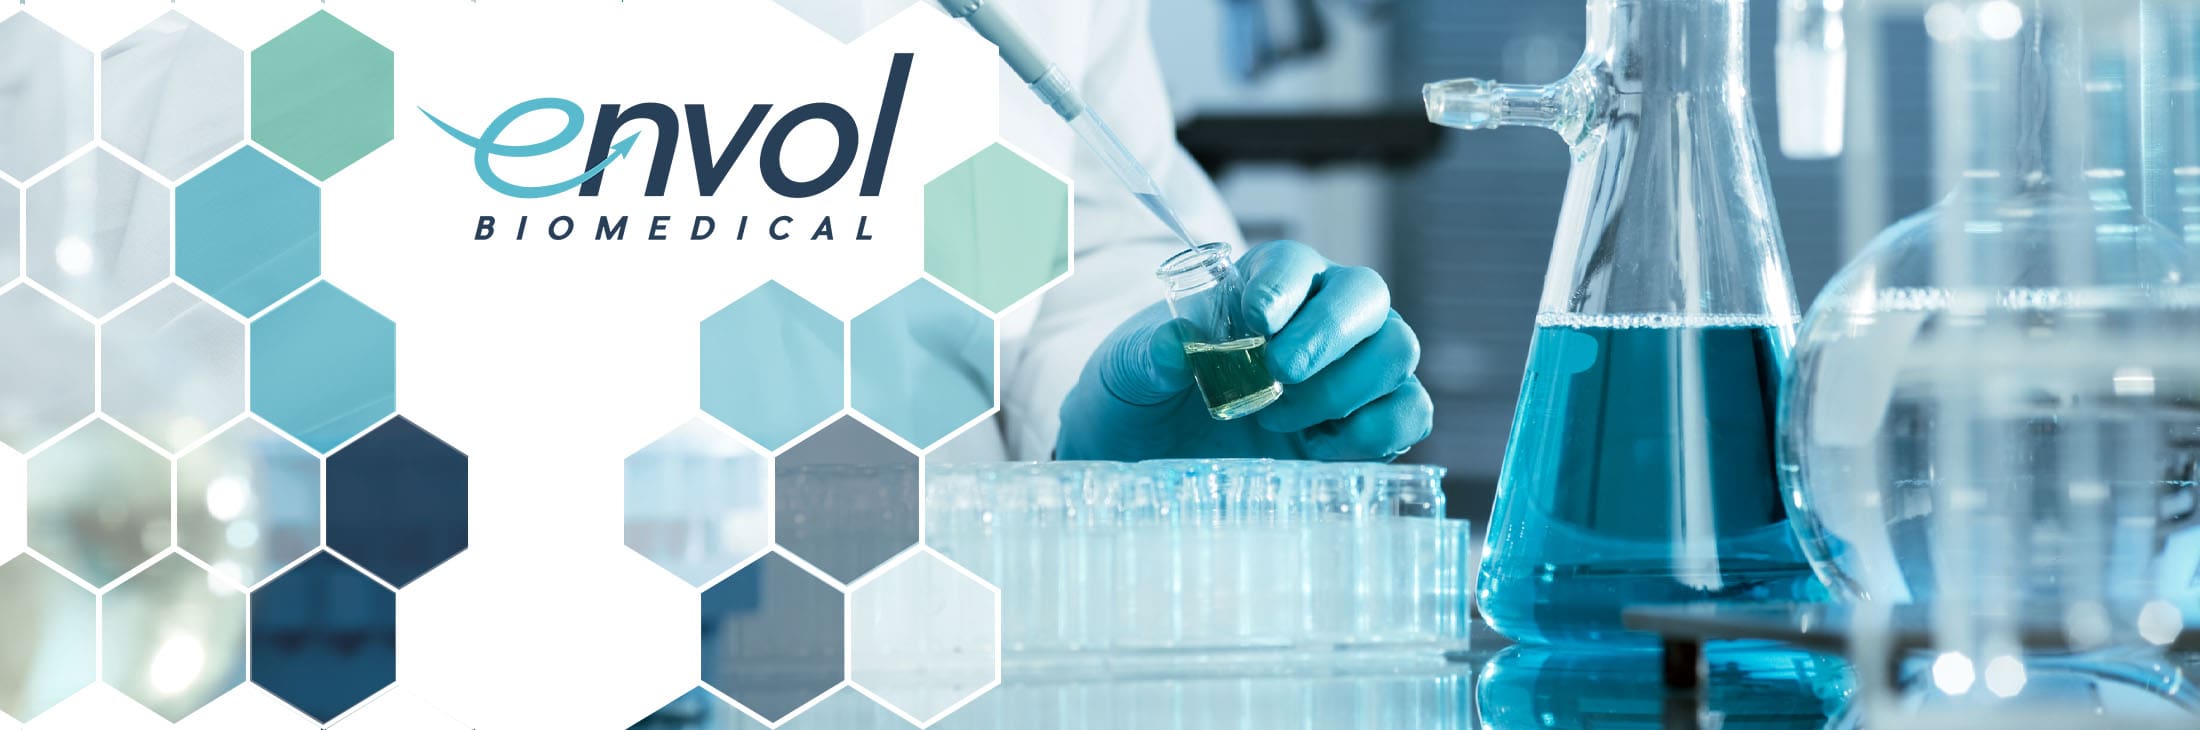 Featured image for “Envol Biomedical: Contract Research Laboratories’ Unparalleled Access to Nonhuman Primates Facilitates Meeting Customer Biomedical Research Needs”